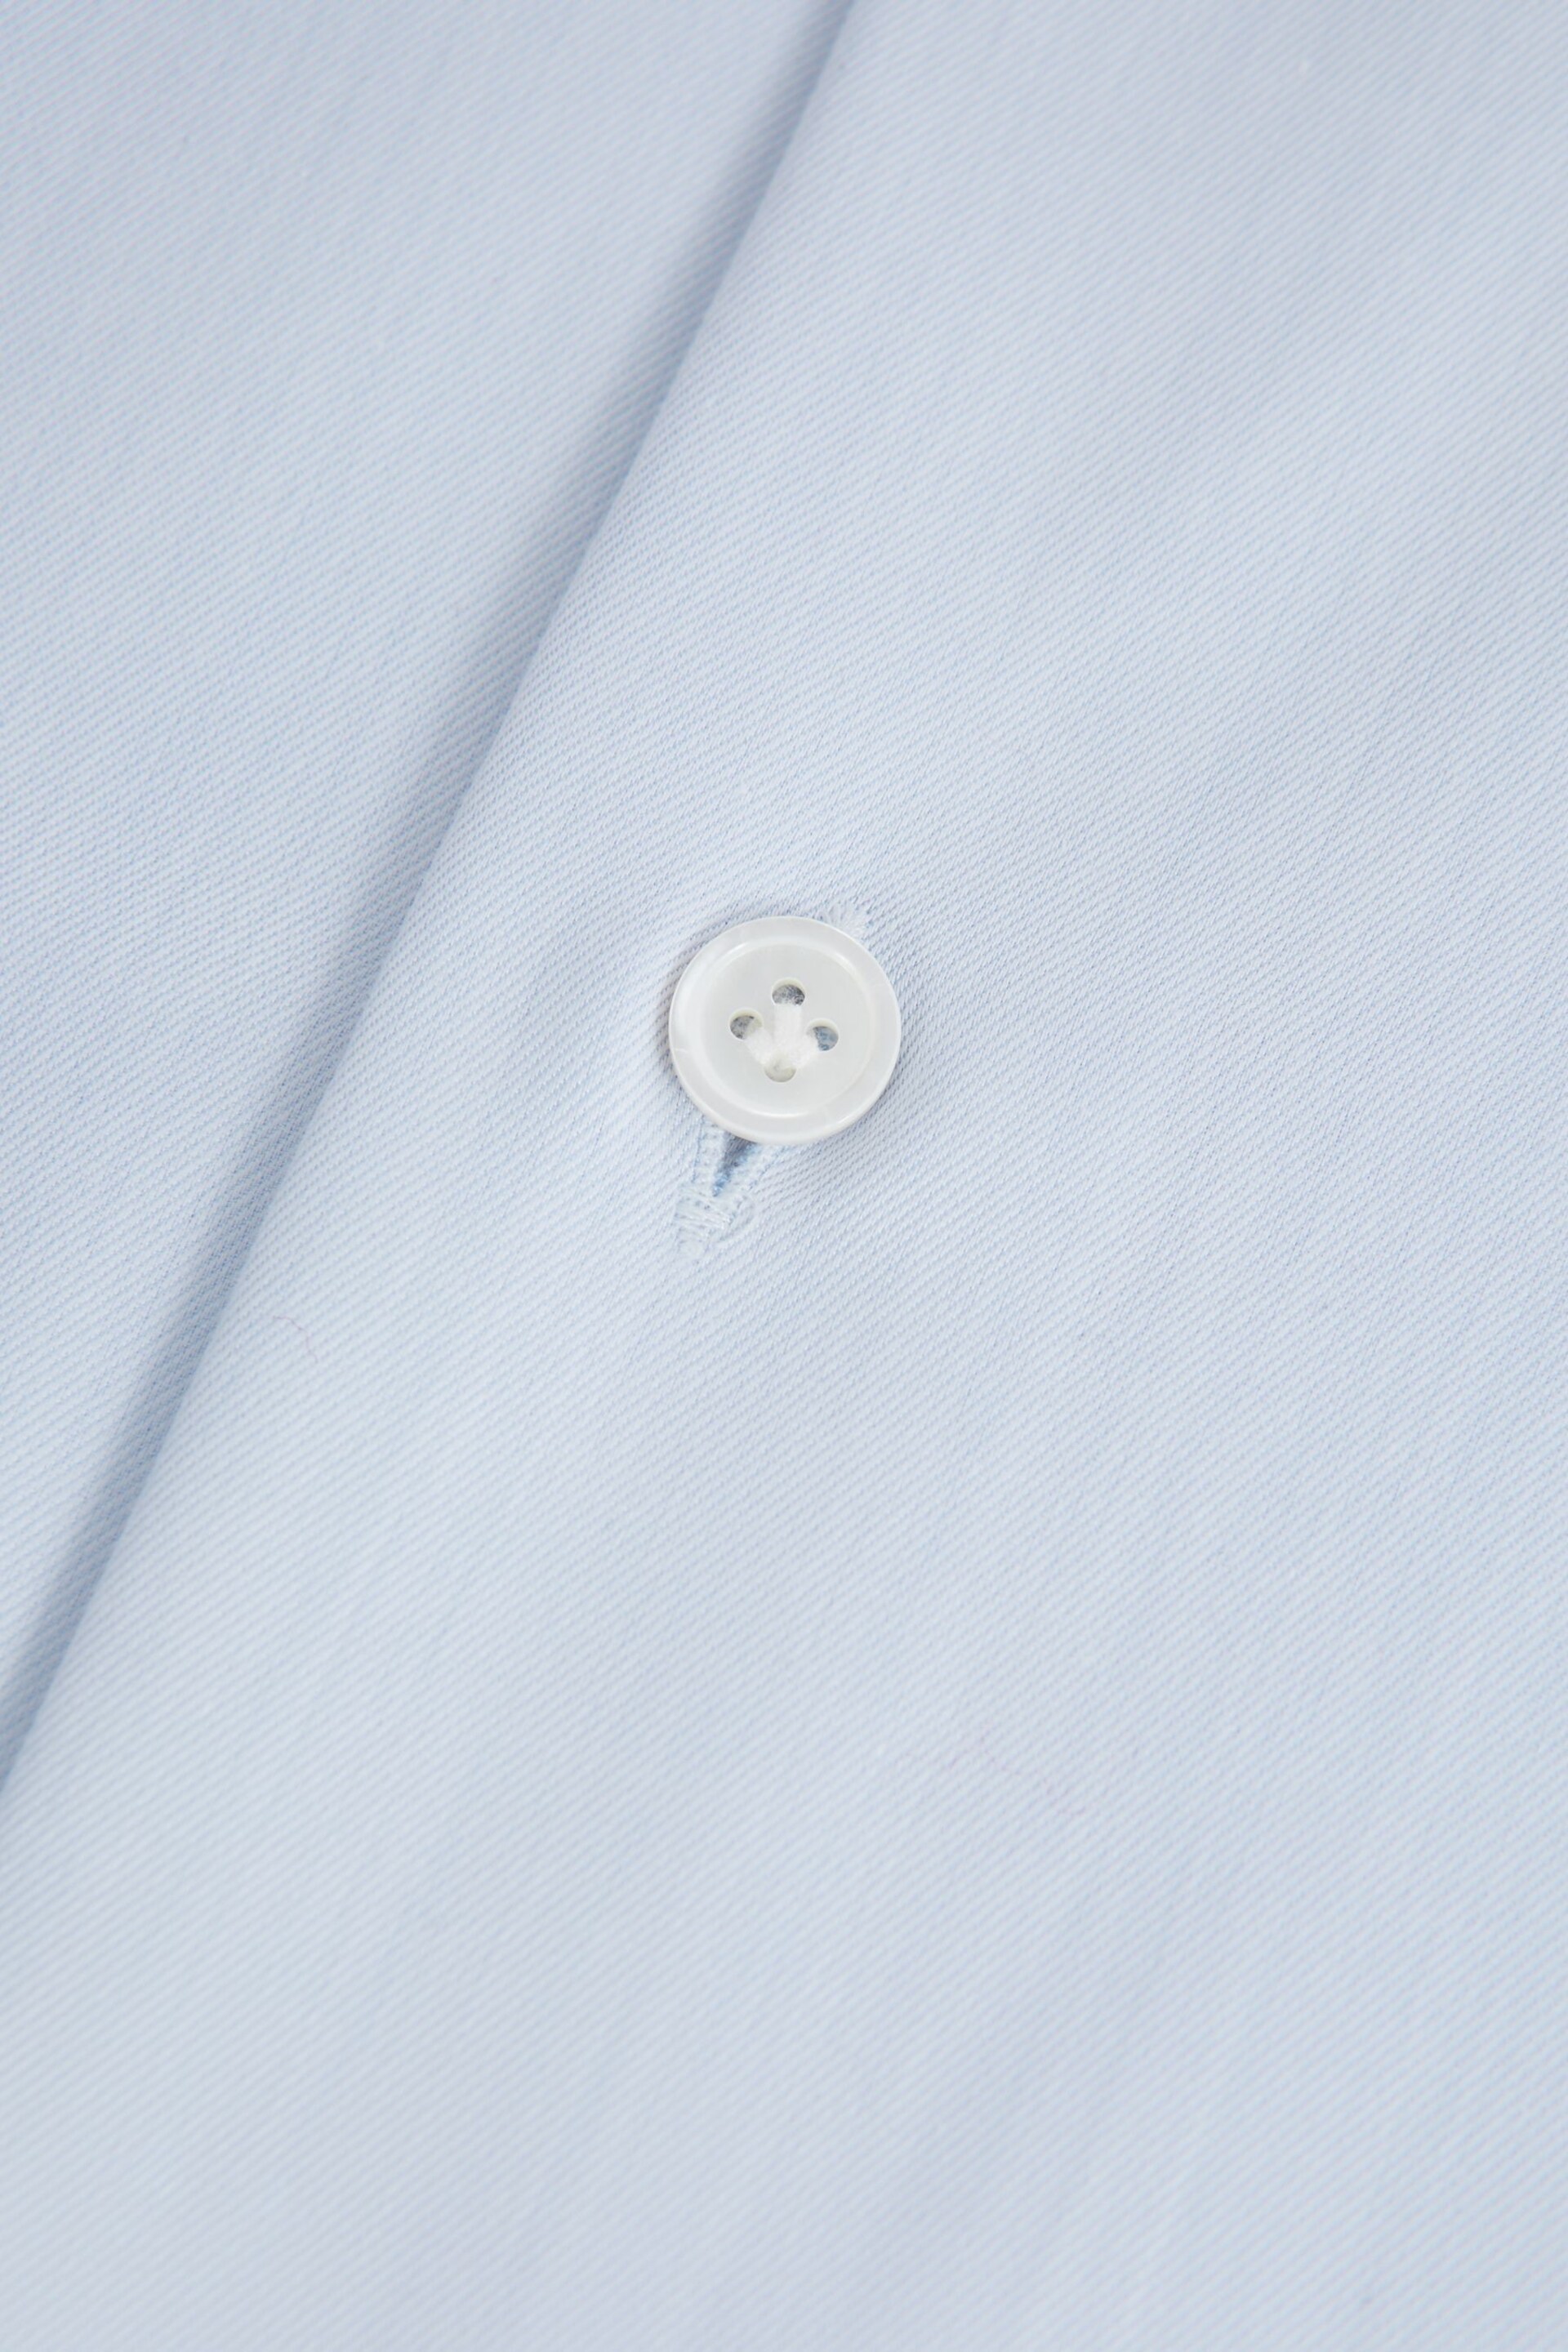 Atelier Cotton Mother of Pearl Shirt - Image 7 of 7